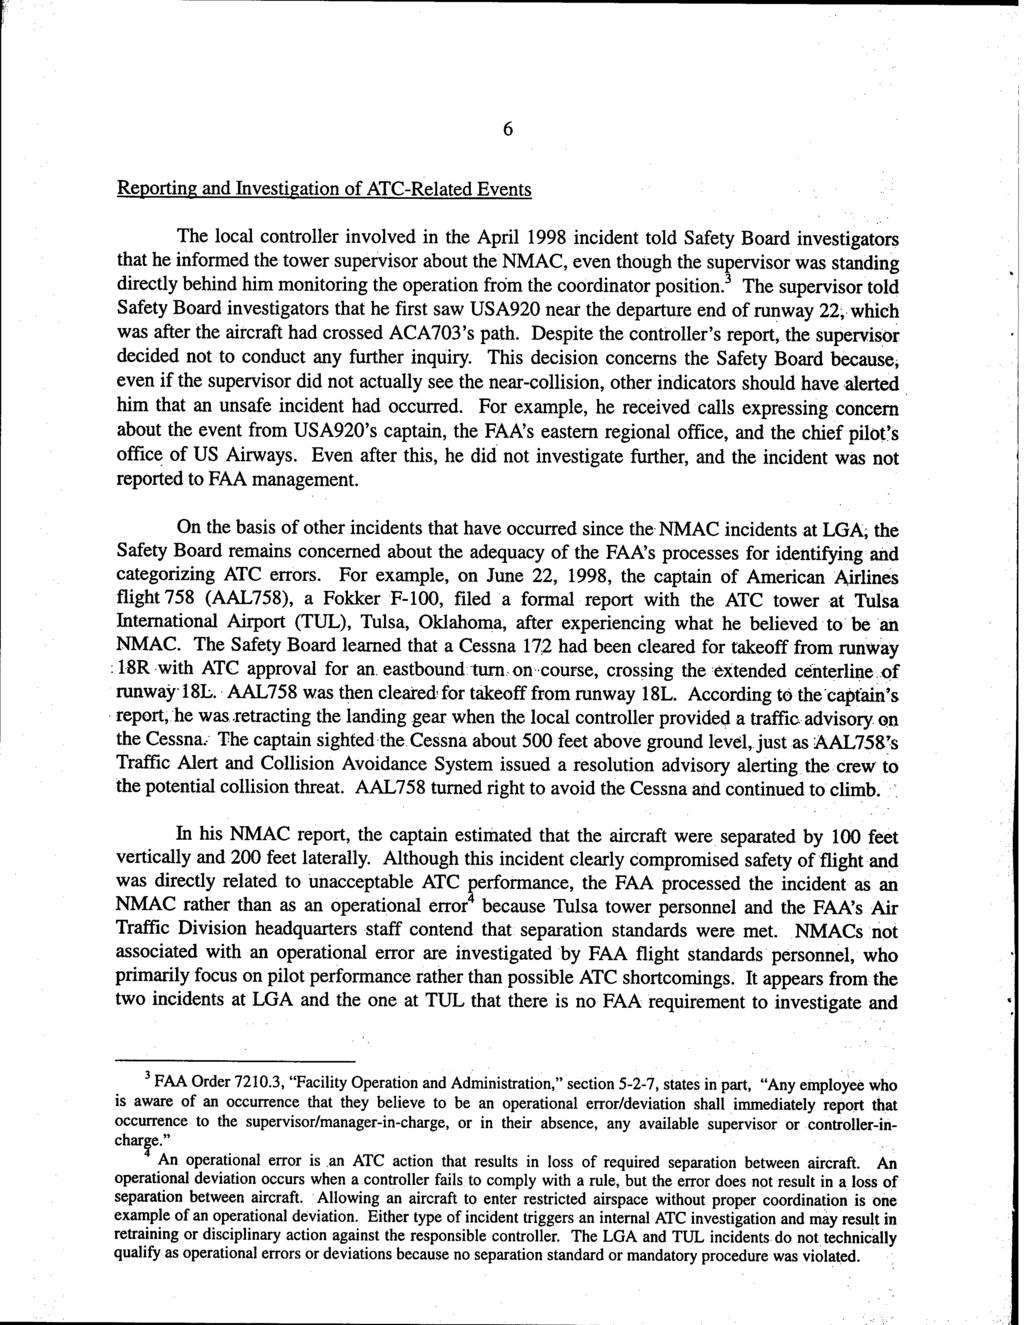 Reporting and Investigation of ATC-Related Events The local controller involved in the April 1998 incident told Safety Board investigators that he informed the tower supervisor about the NMAC, even